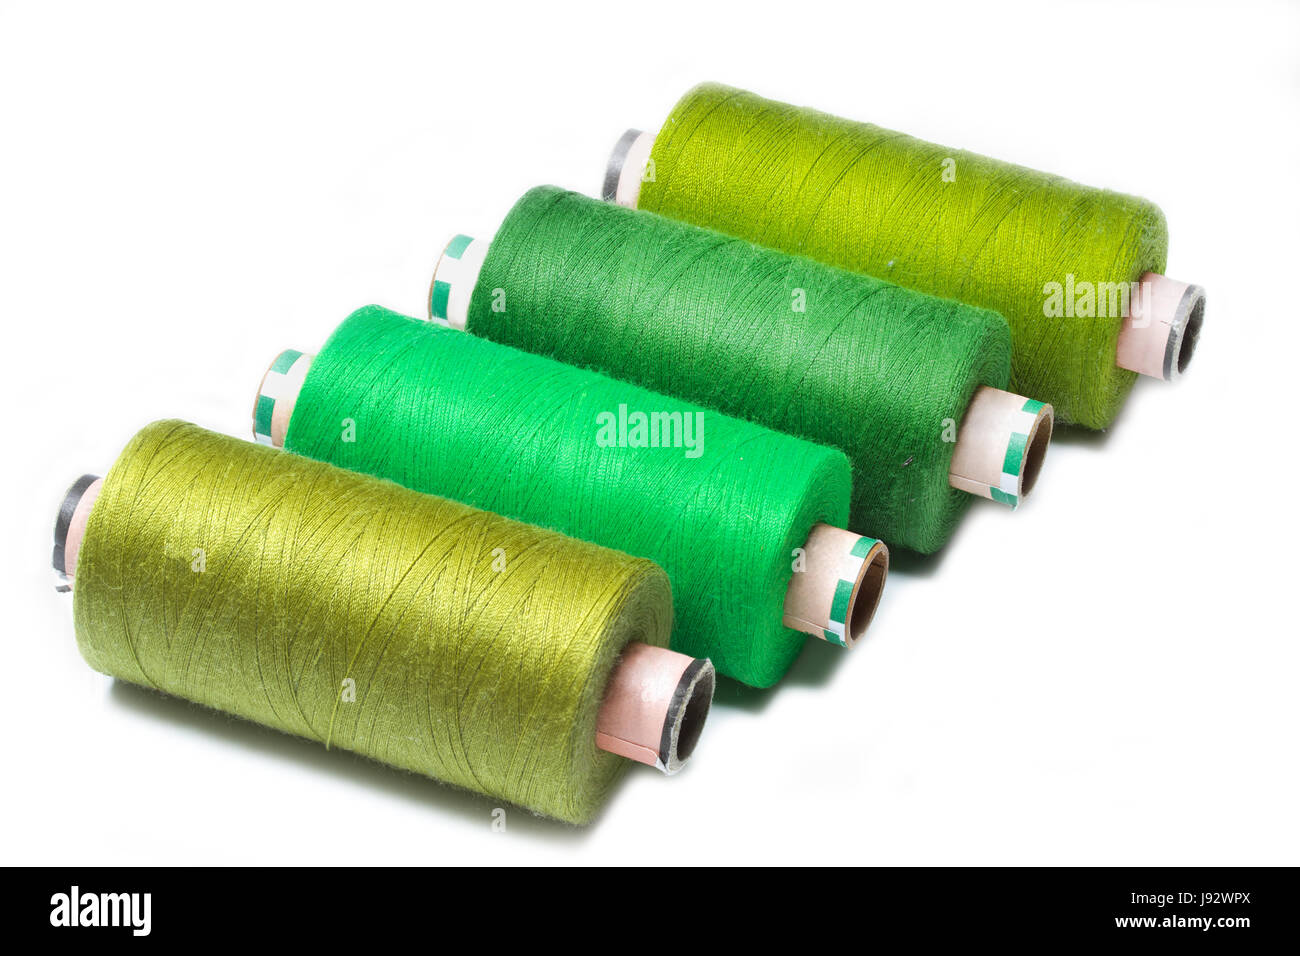 colored cotton reels Stock Photo